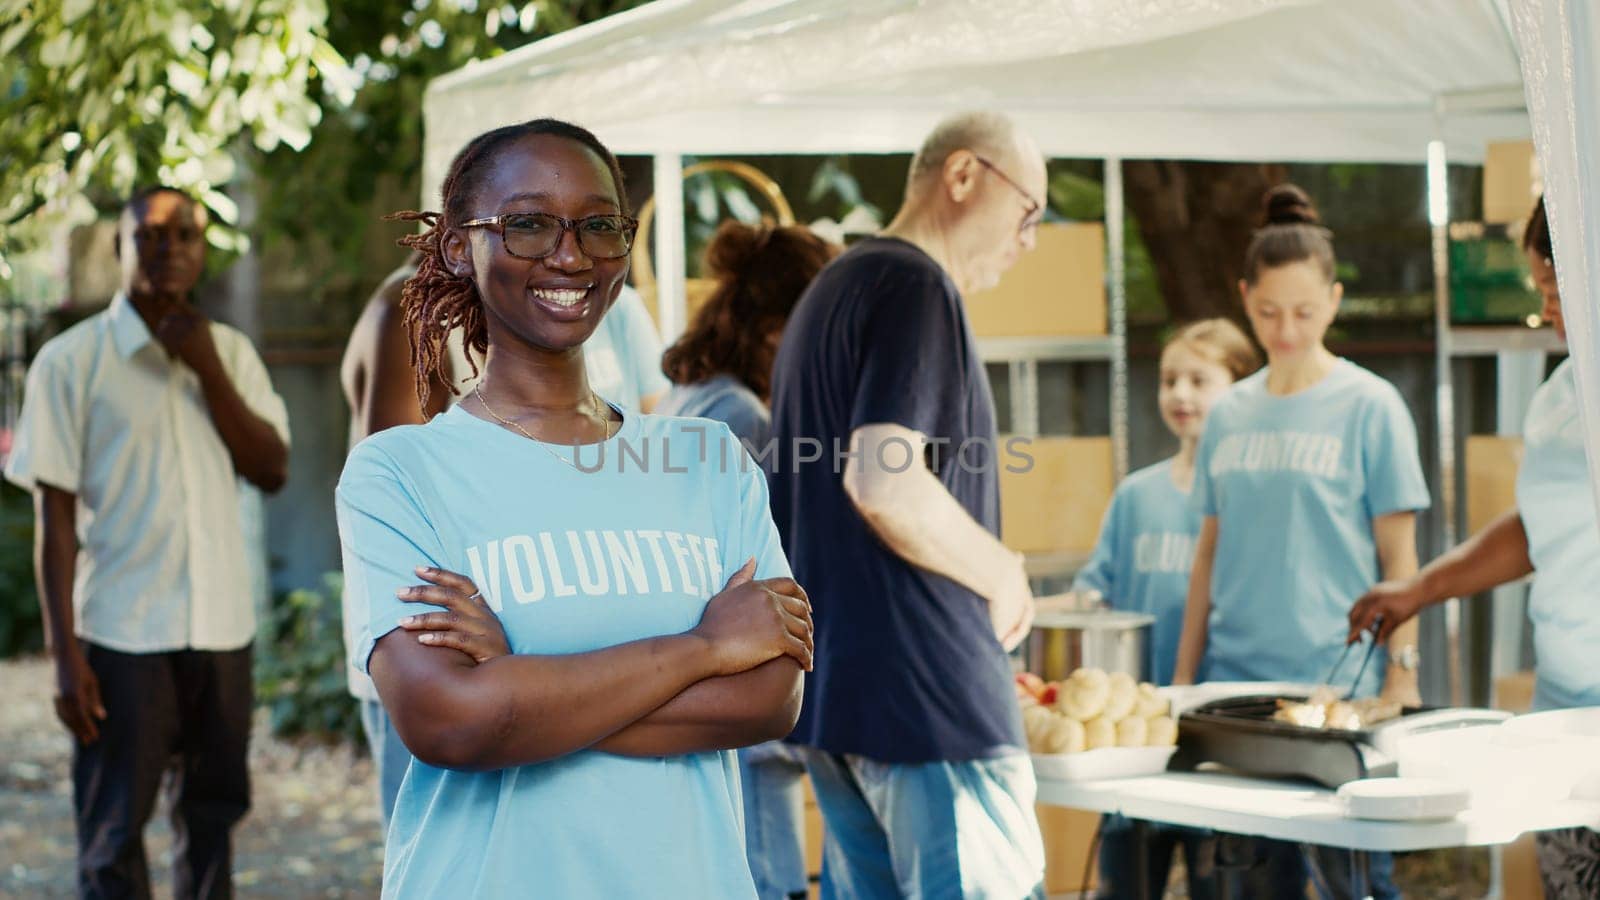 Woman with glasses at a non-profit event by DCStudio